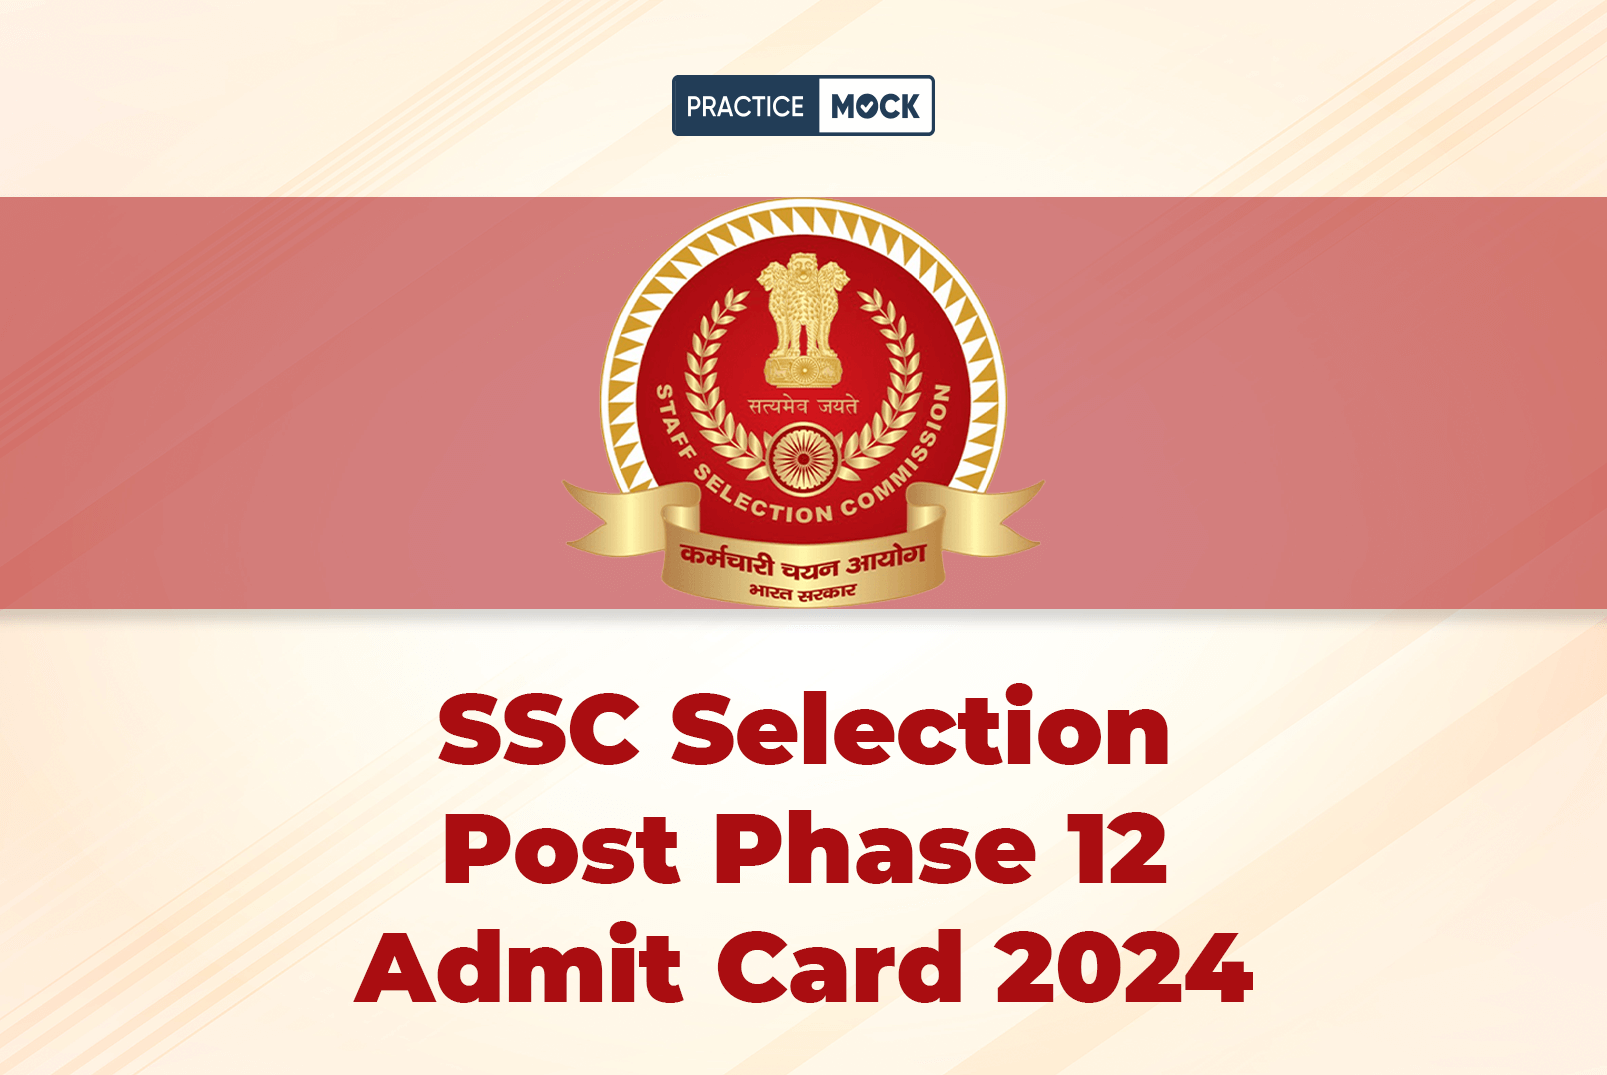 SSC Selection Post Phase 12 Admit Card 2024